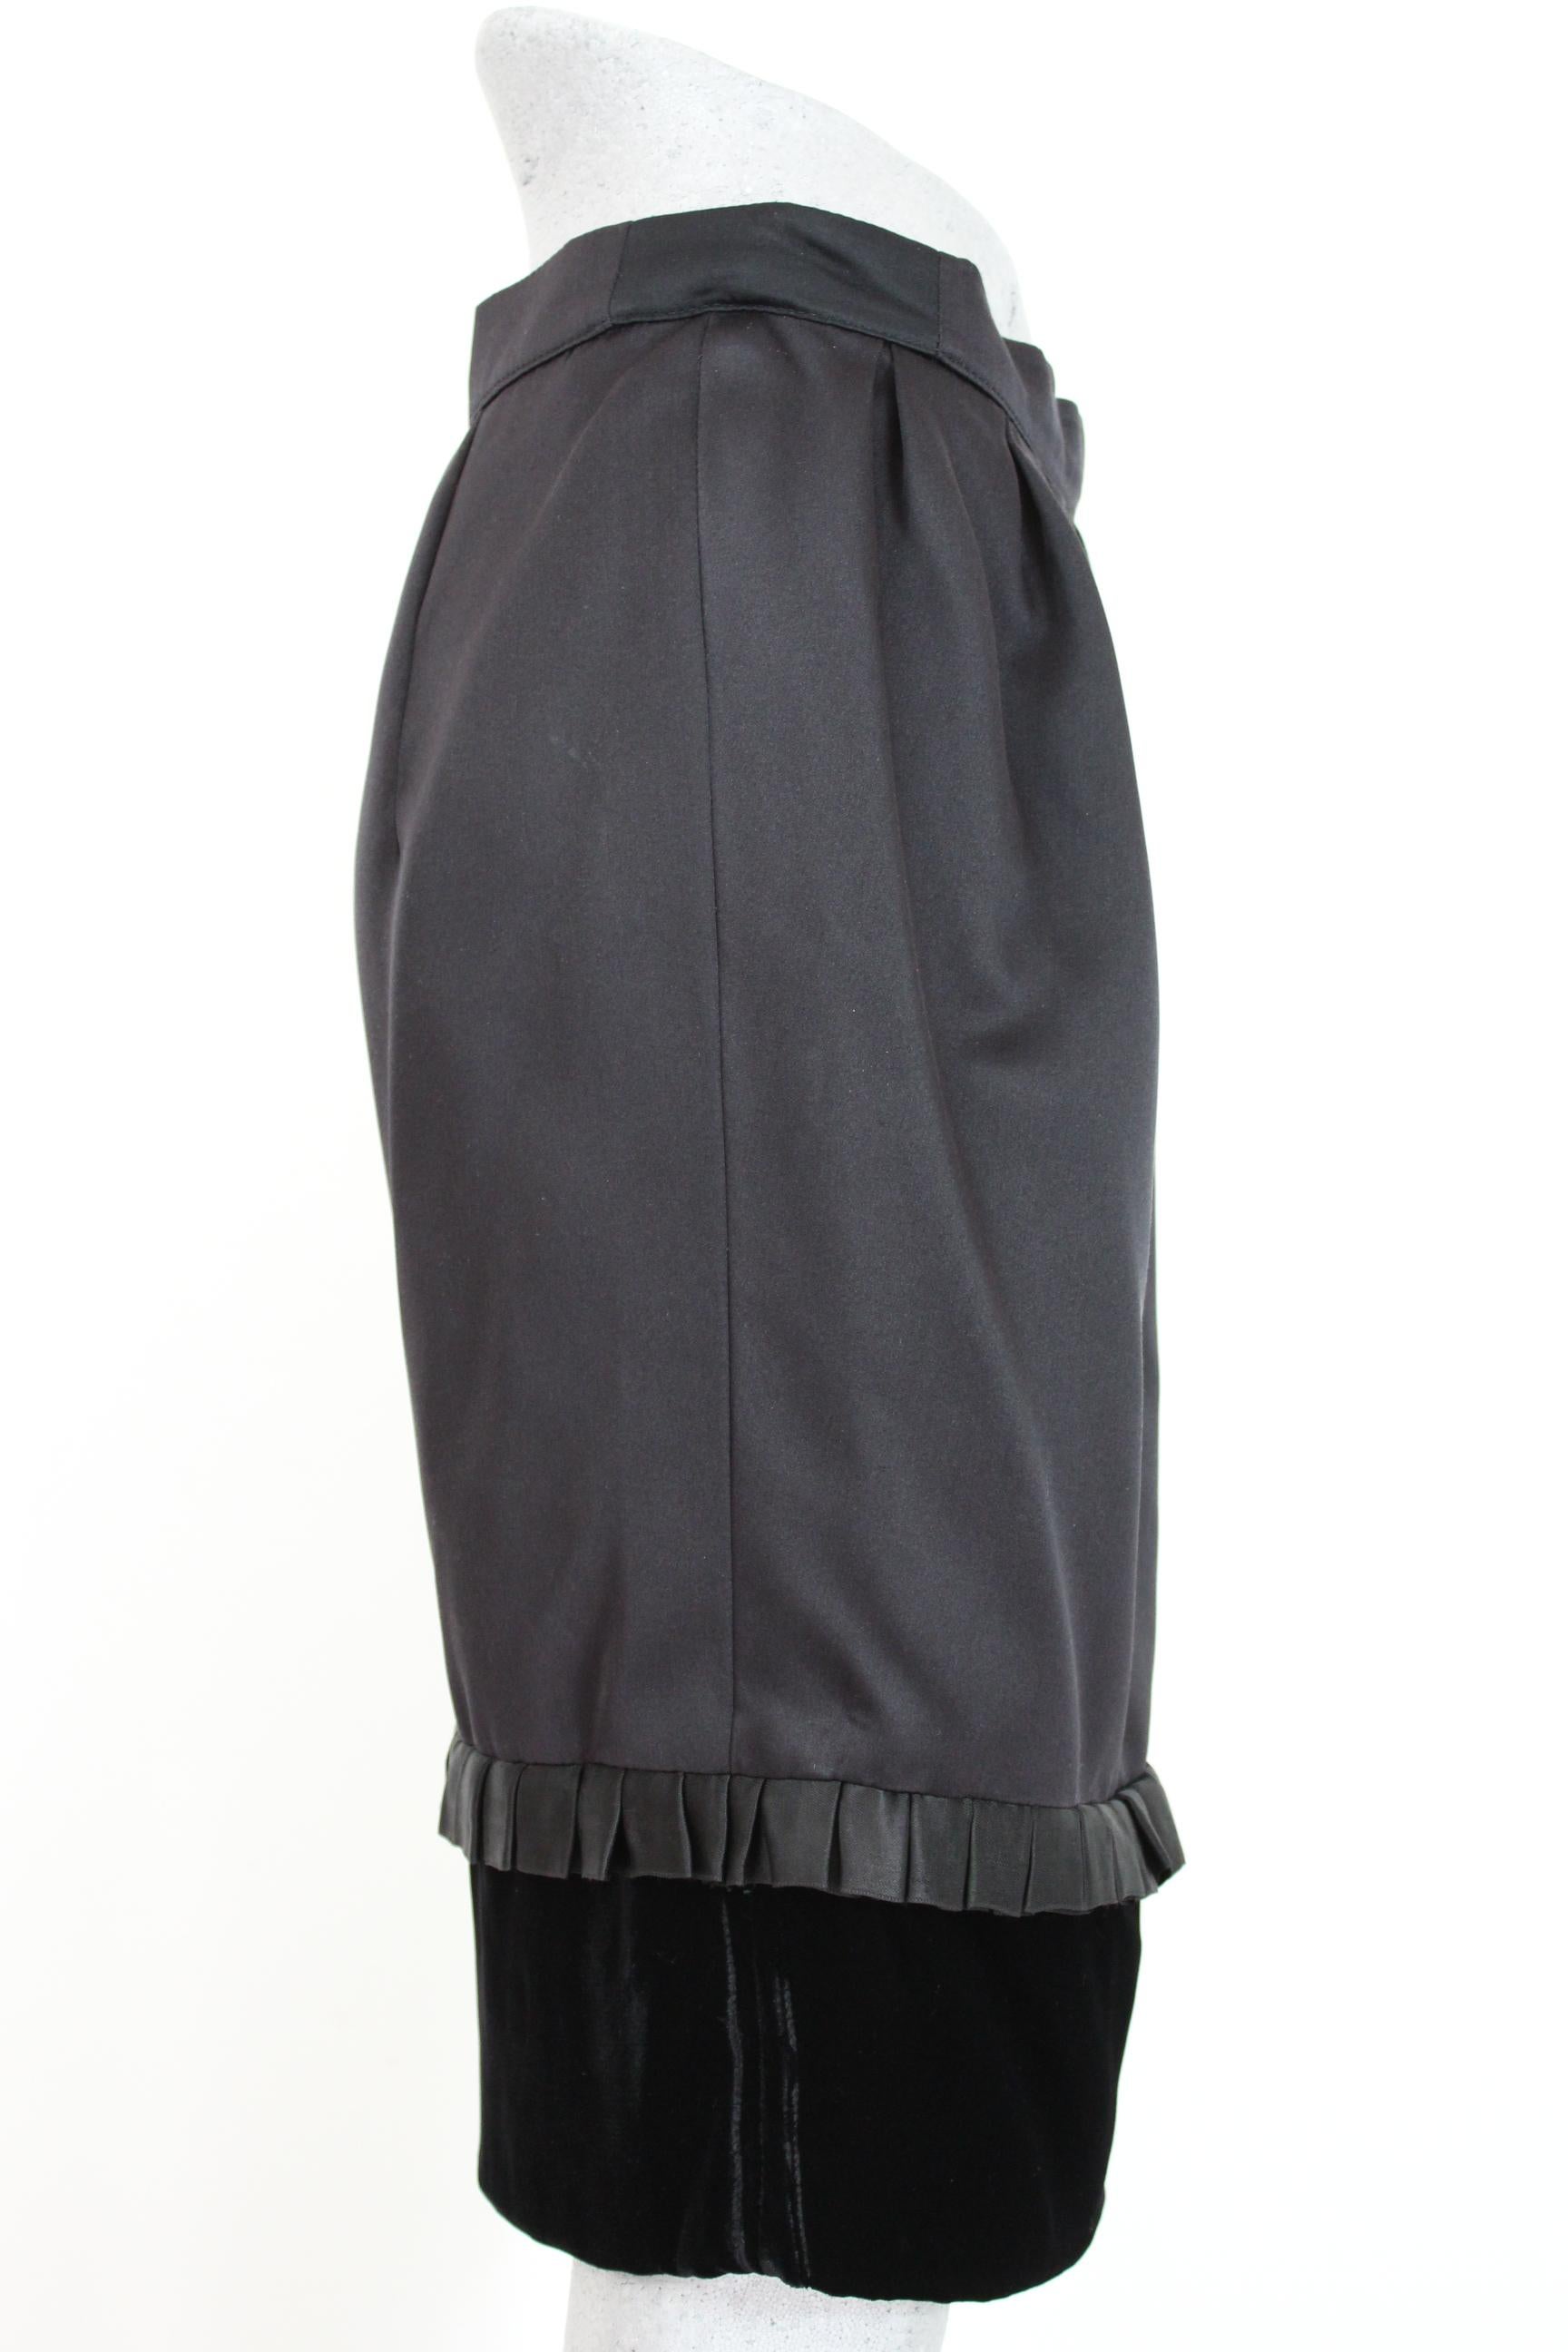 Valentino Boutique Black Satin Velvet Flounces Evening Sheath Skirt  In Excellent Condition For Sale In Brindisi, Bt